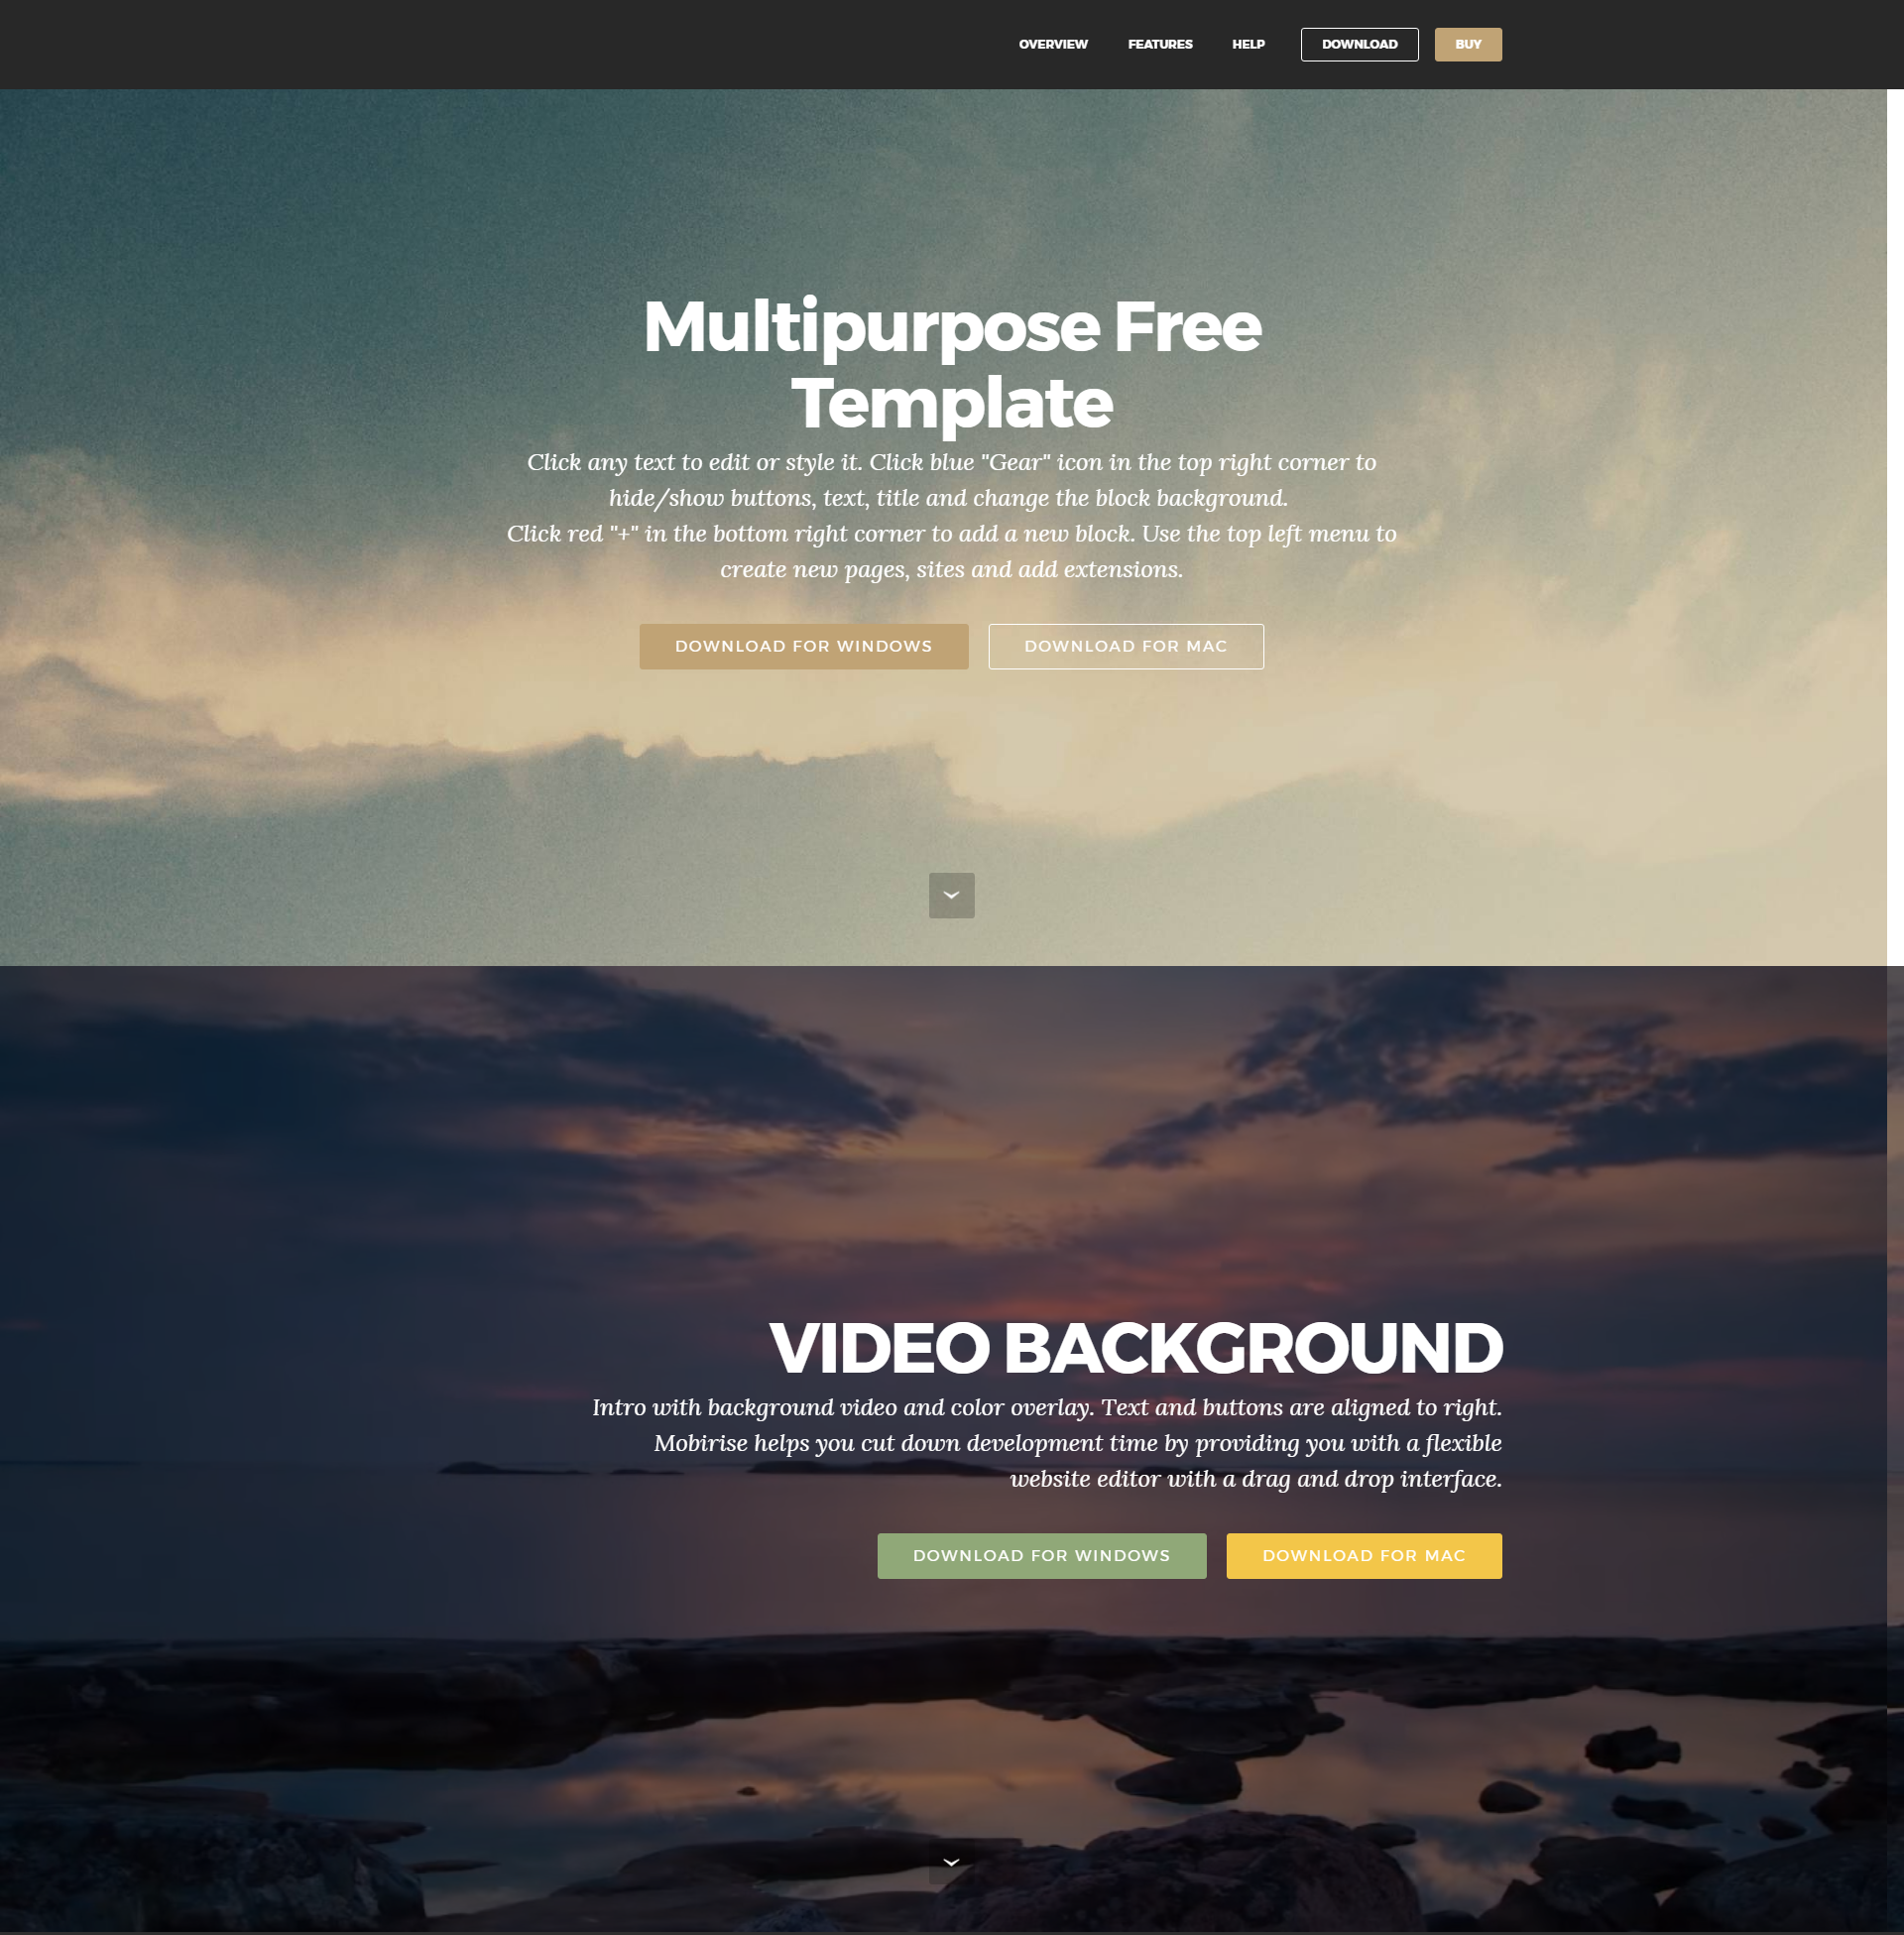 HTML Bootstrap Themes